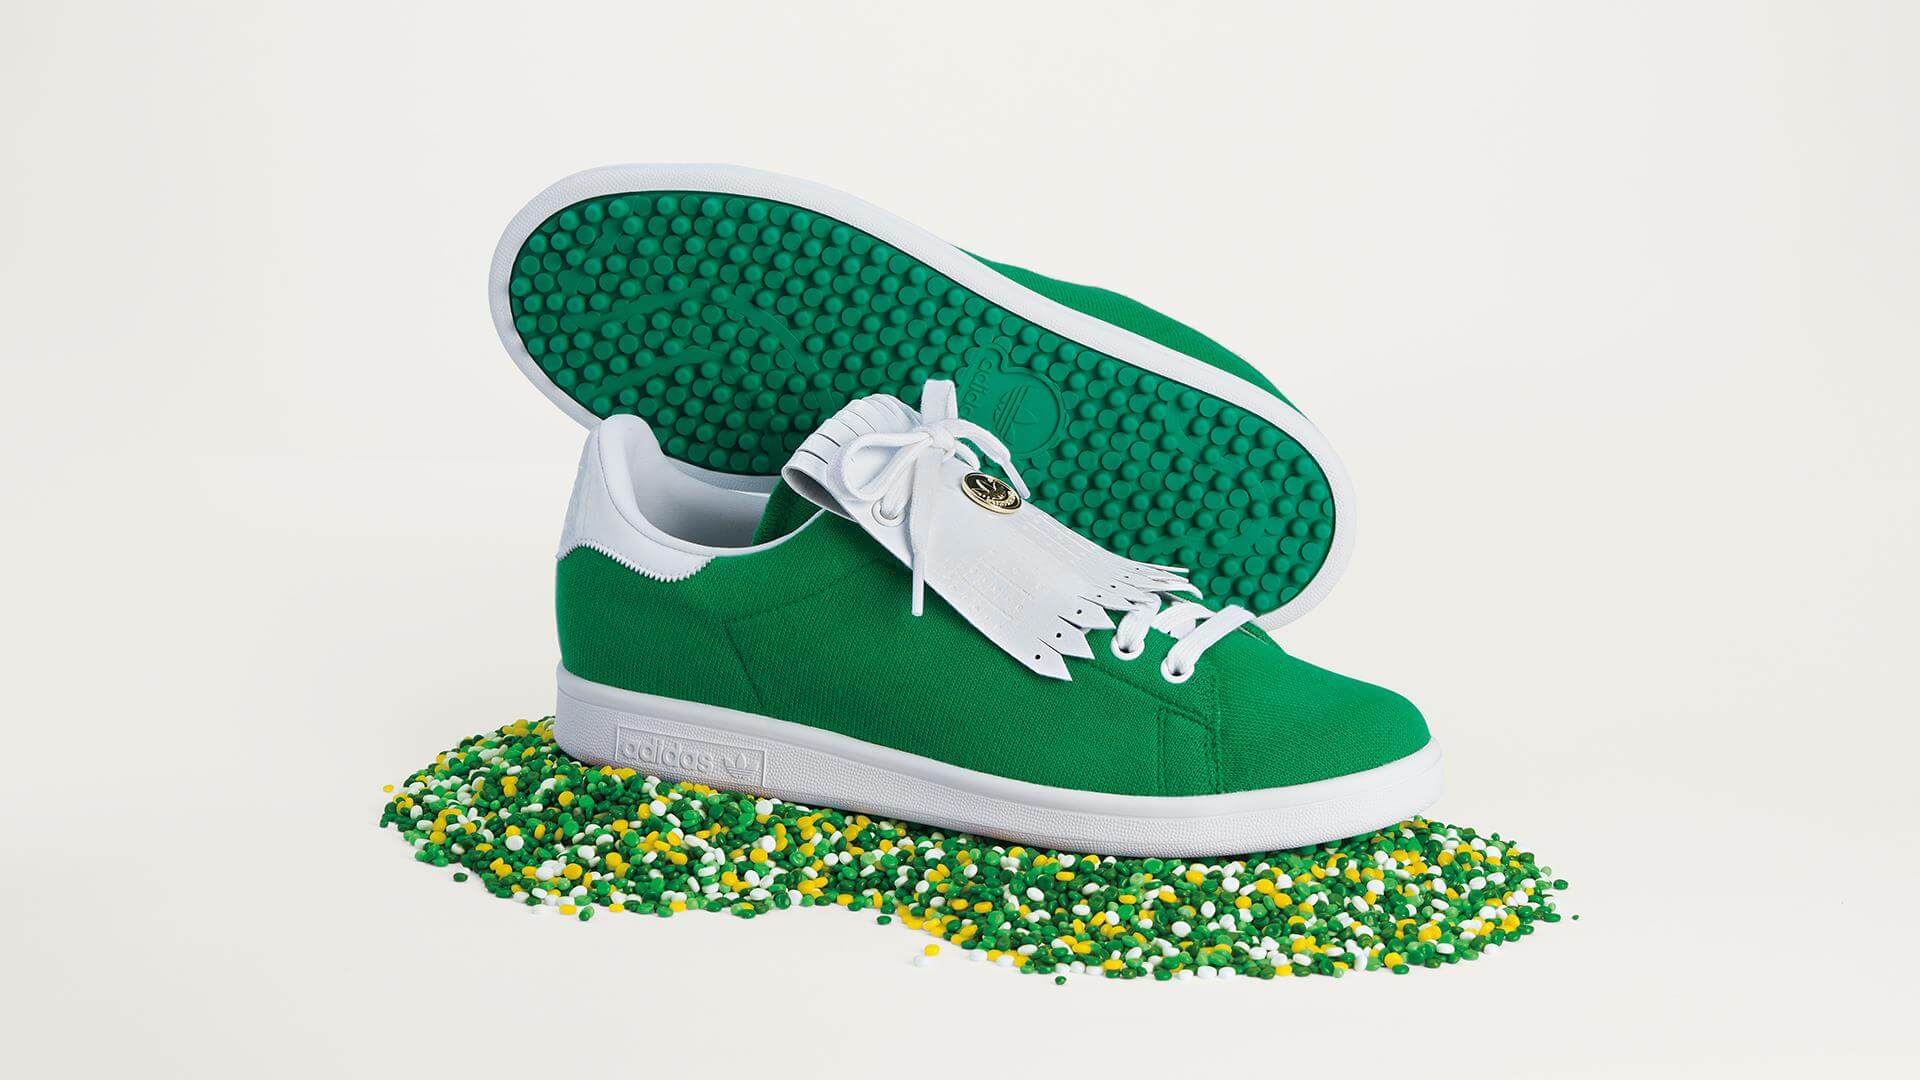 STYLE: adidas Releases Limited-Edition Stan Smith Golf